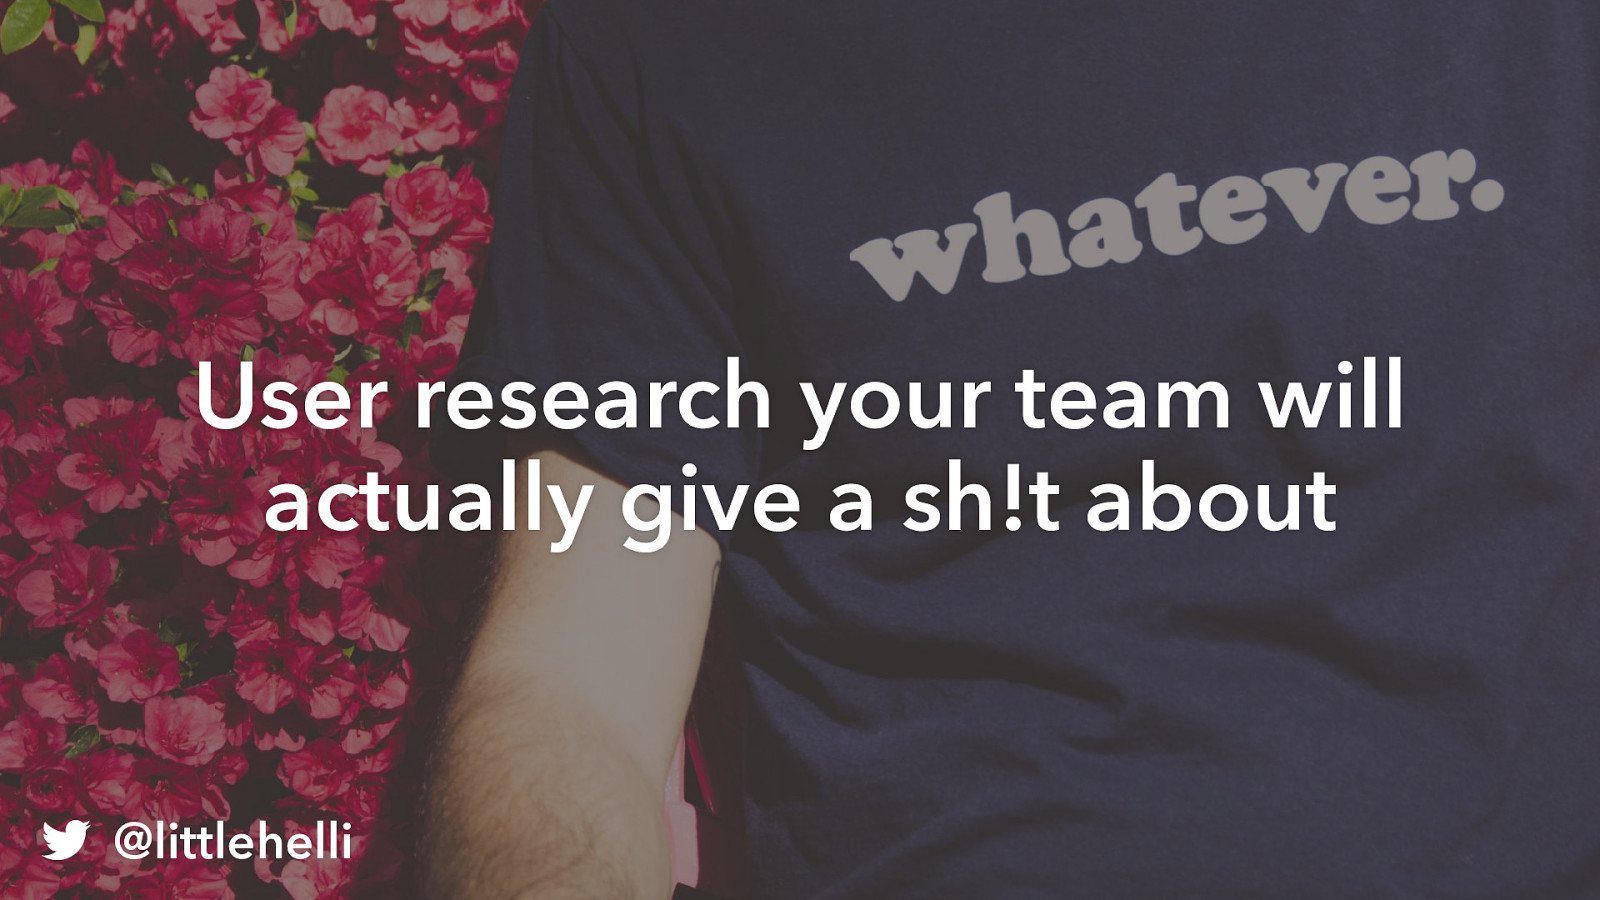 User research your team will actually give a sh!t about